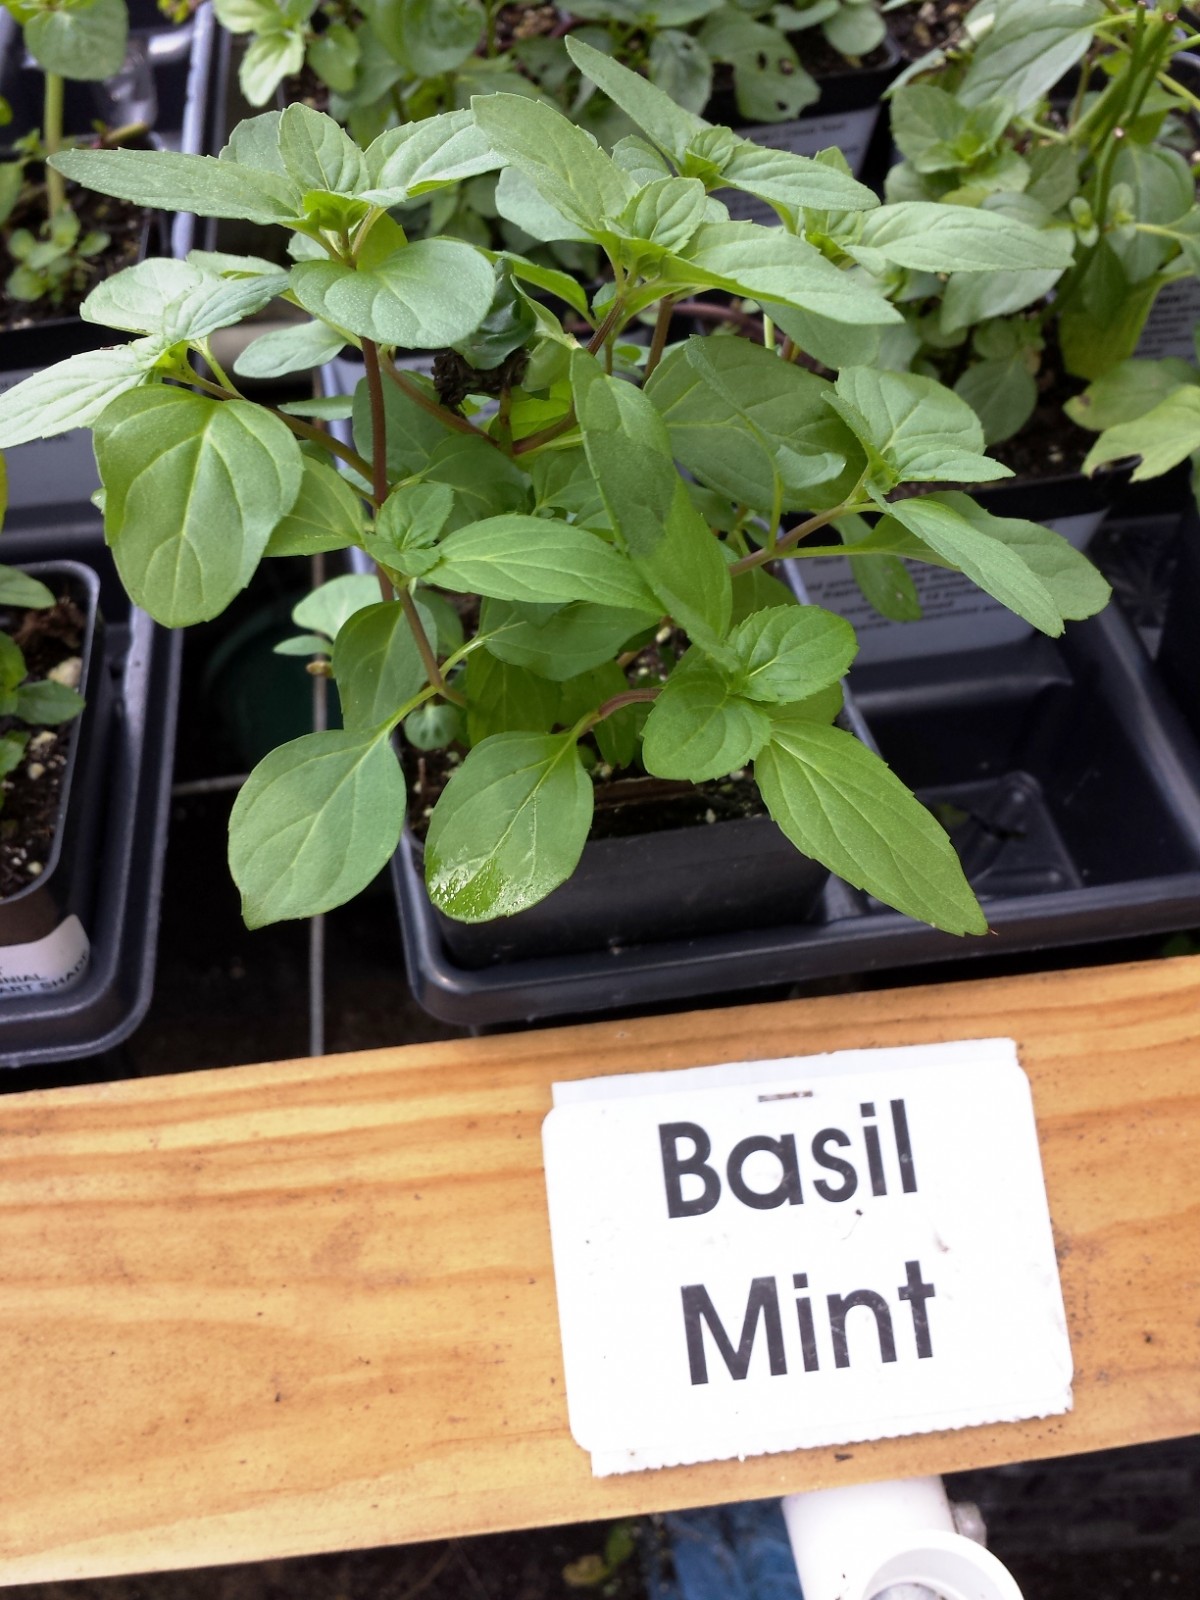 Basil Mint - NEW ITEMS JUST LISTED